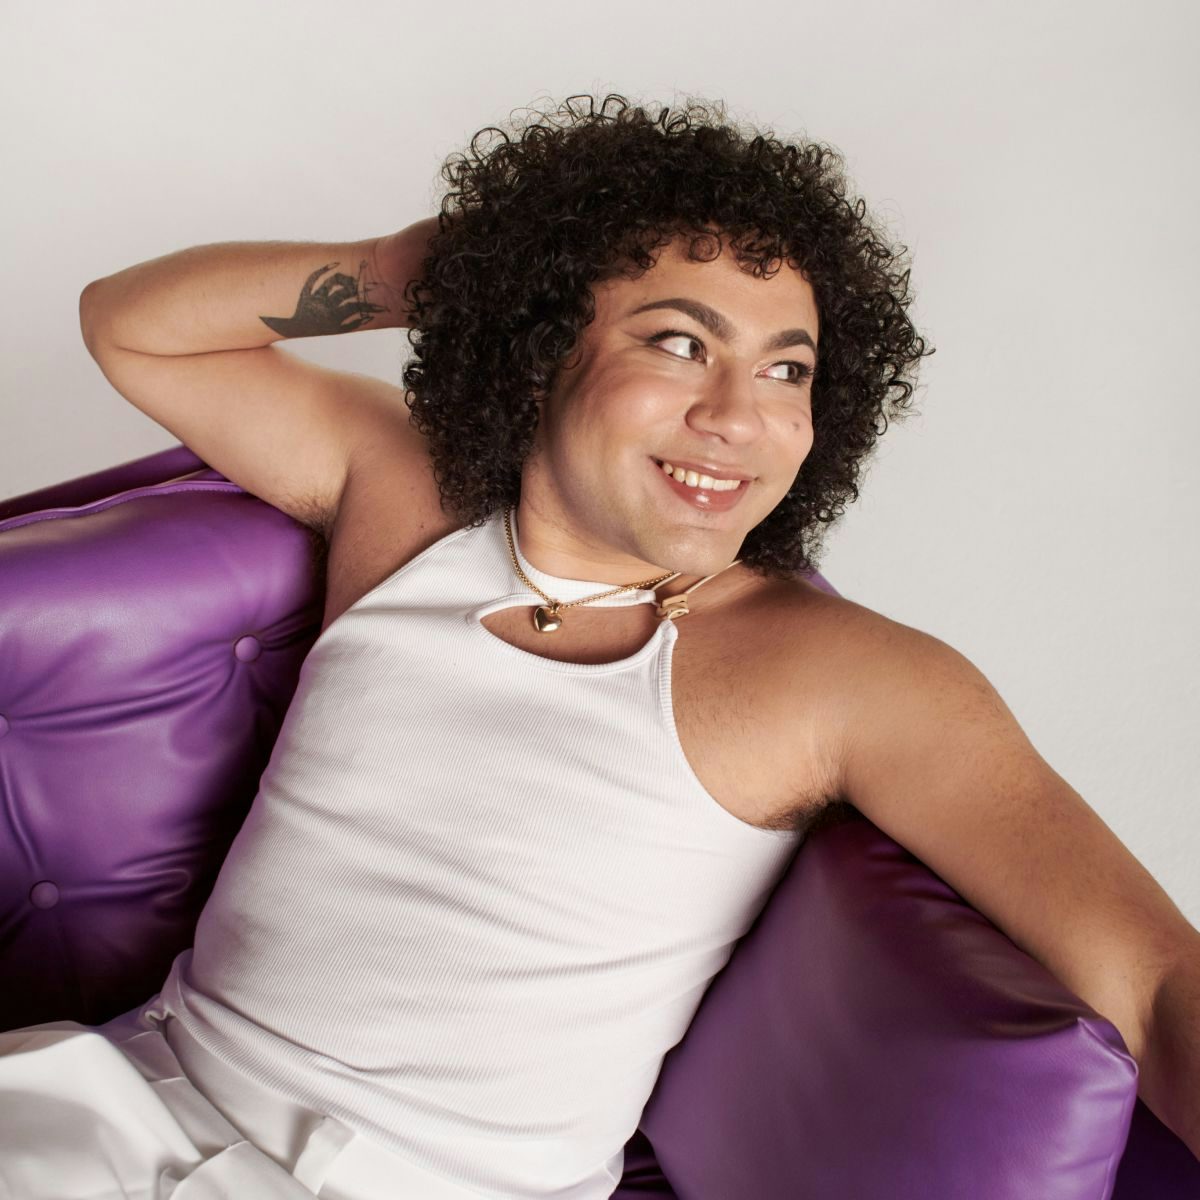 A portrait of Travis looking off-camera, seated on a purple couch